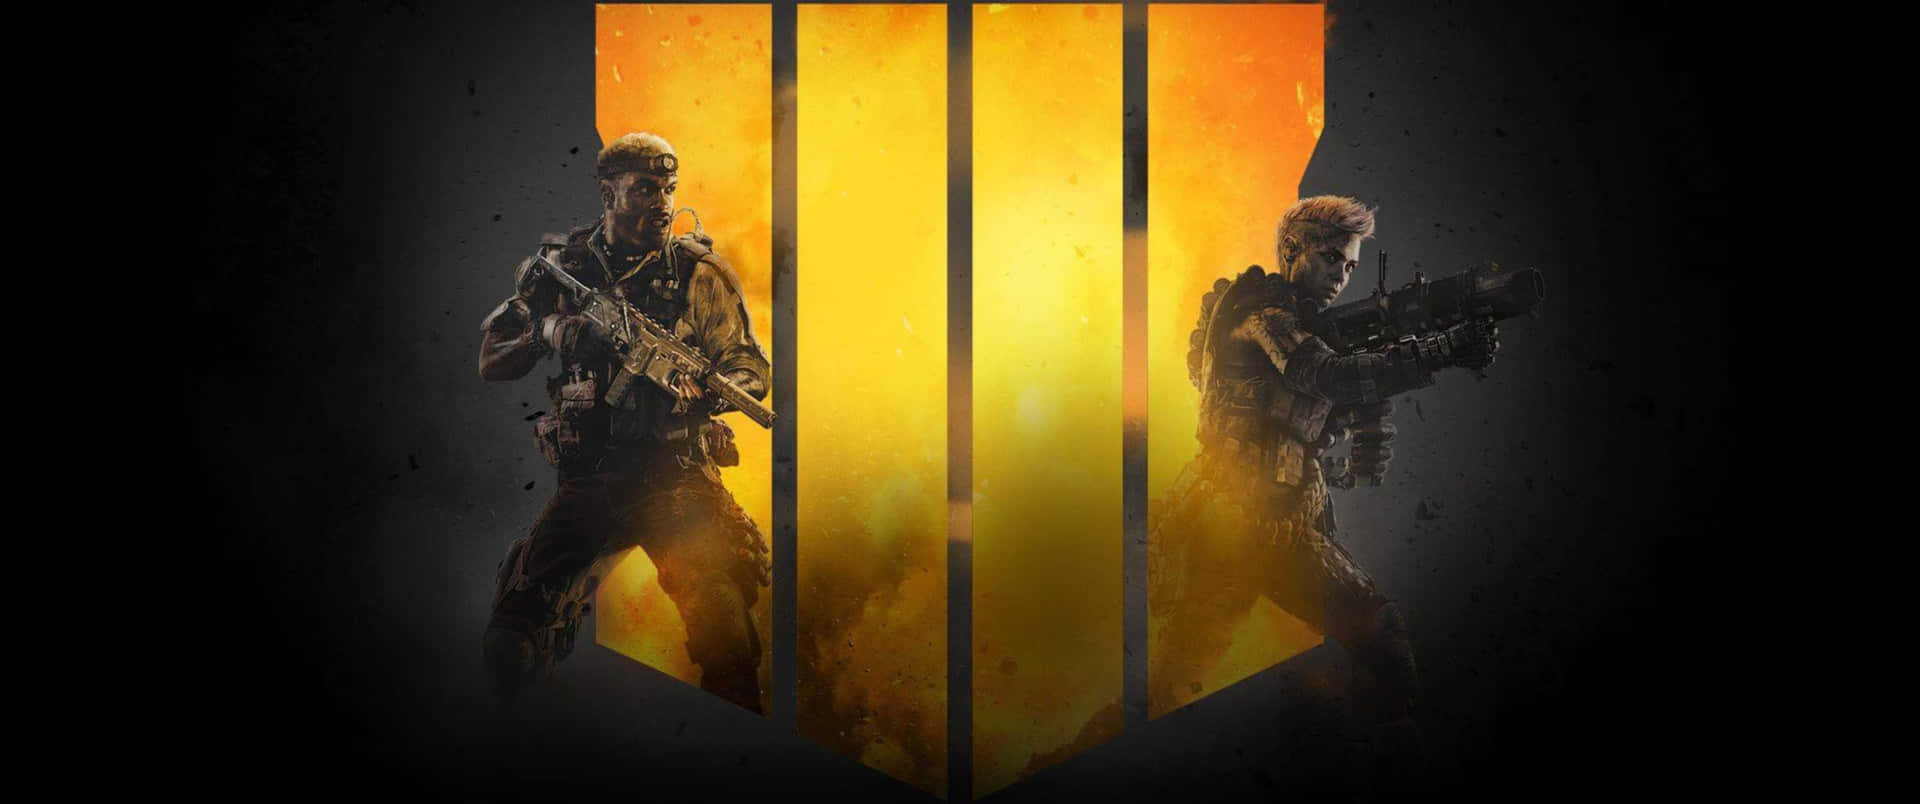 Experience the thrill of Call of Duty Black Ops 4 at 3440x1440p!